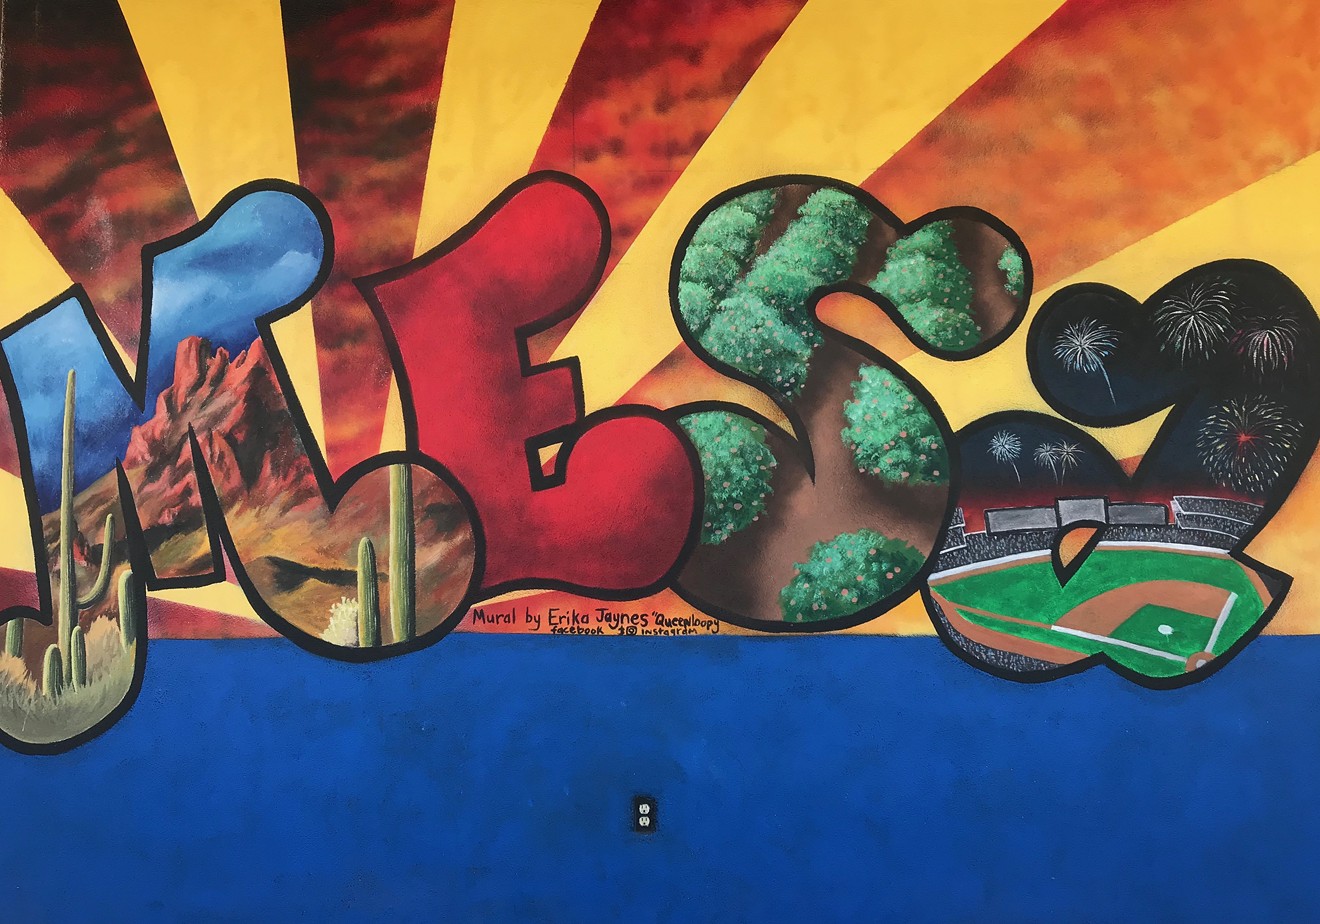 Check out this Erika Jaynes mural when you're in downtown Mesa.